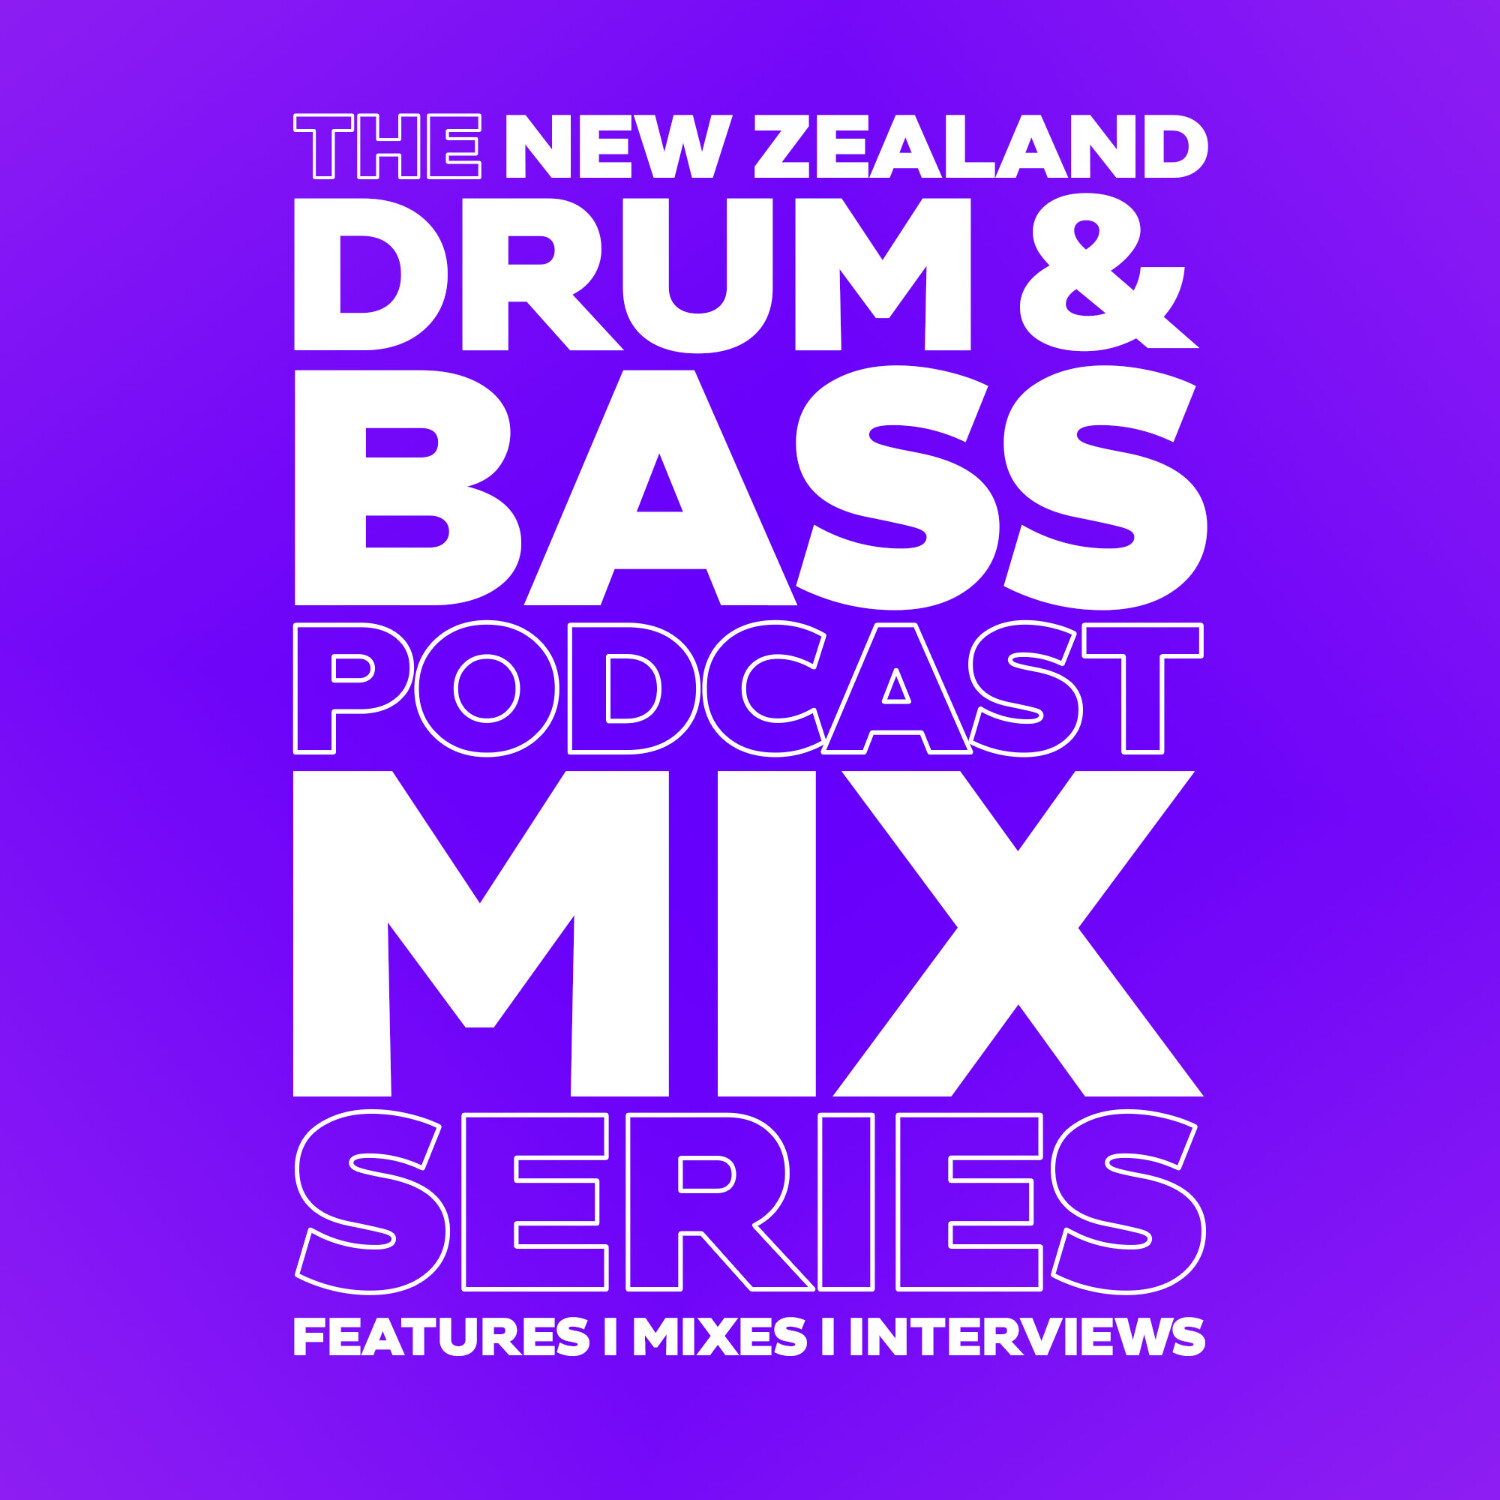 The New Zealand Drum & Bass Podcast - Mix Series